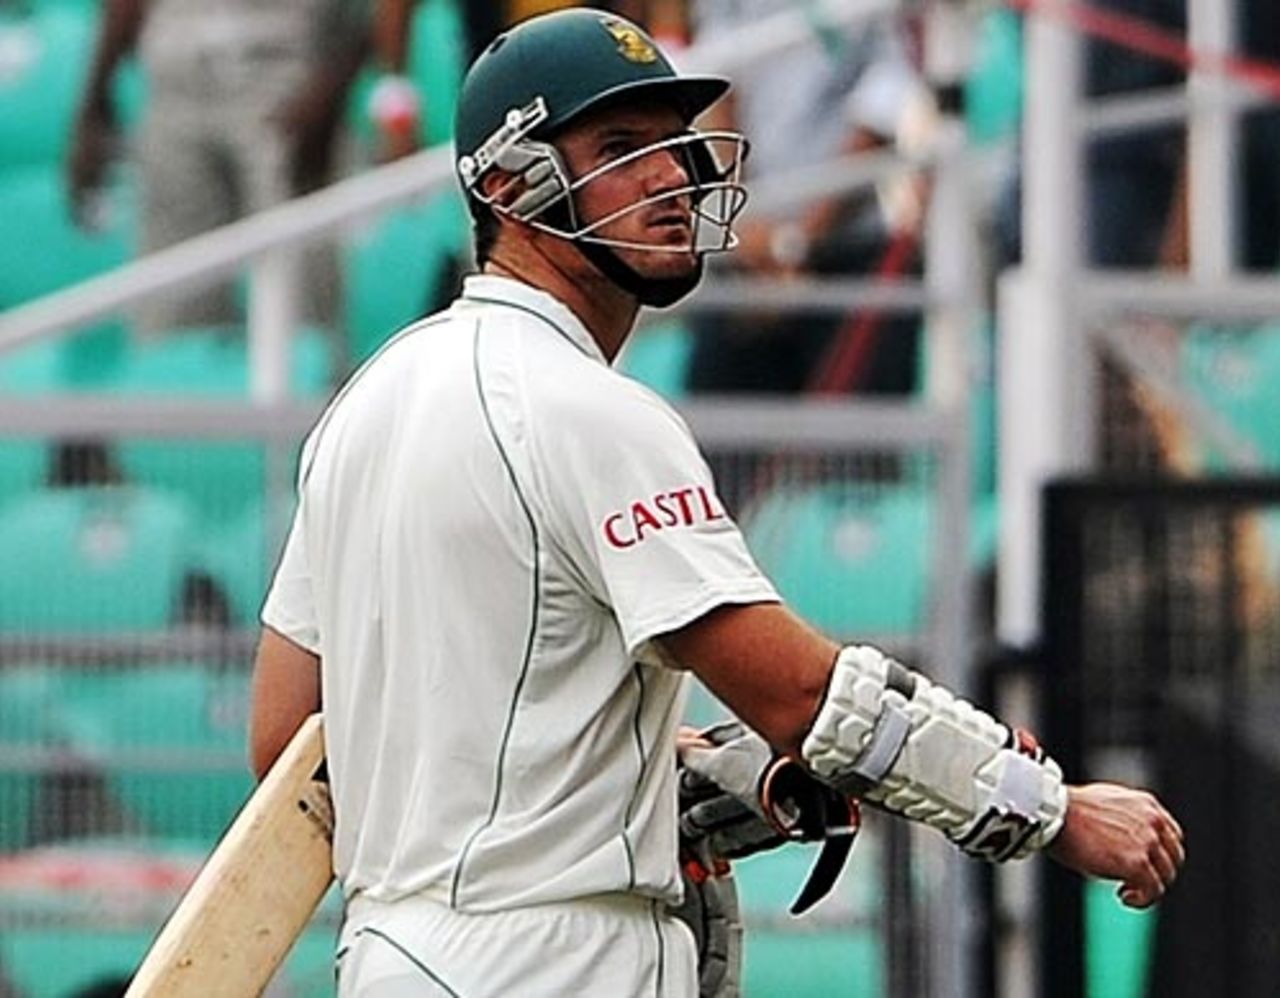 Graeme Smith was bowled by Zaheer Khan, India v South Africa, 1st Test, Nagpur, 1st day, February 6, 2010